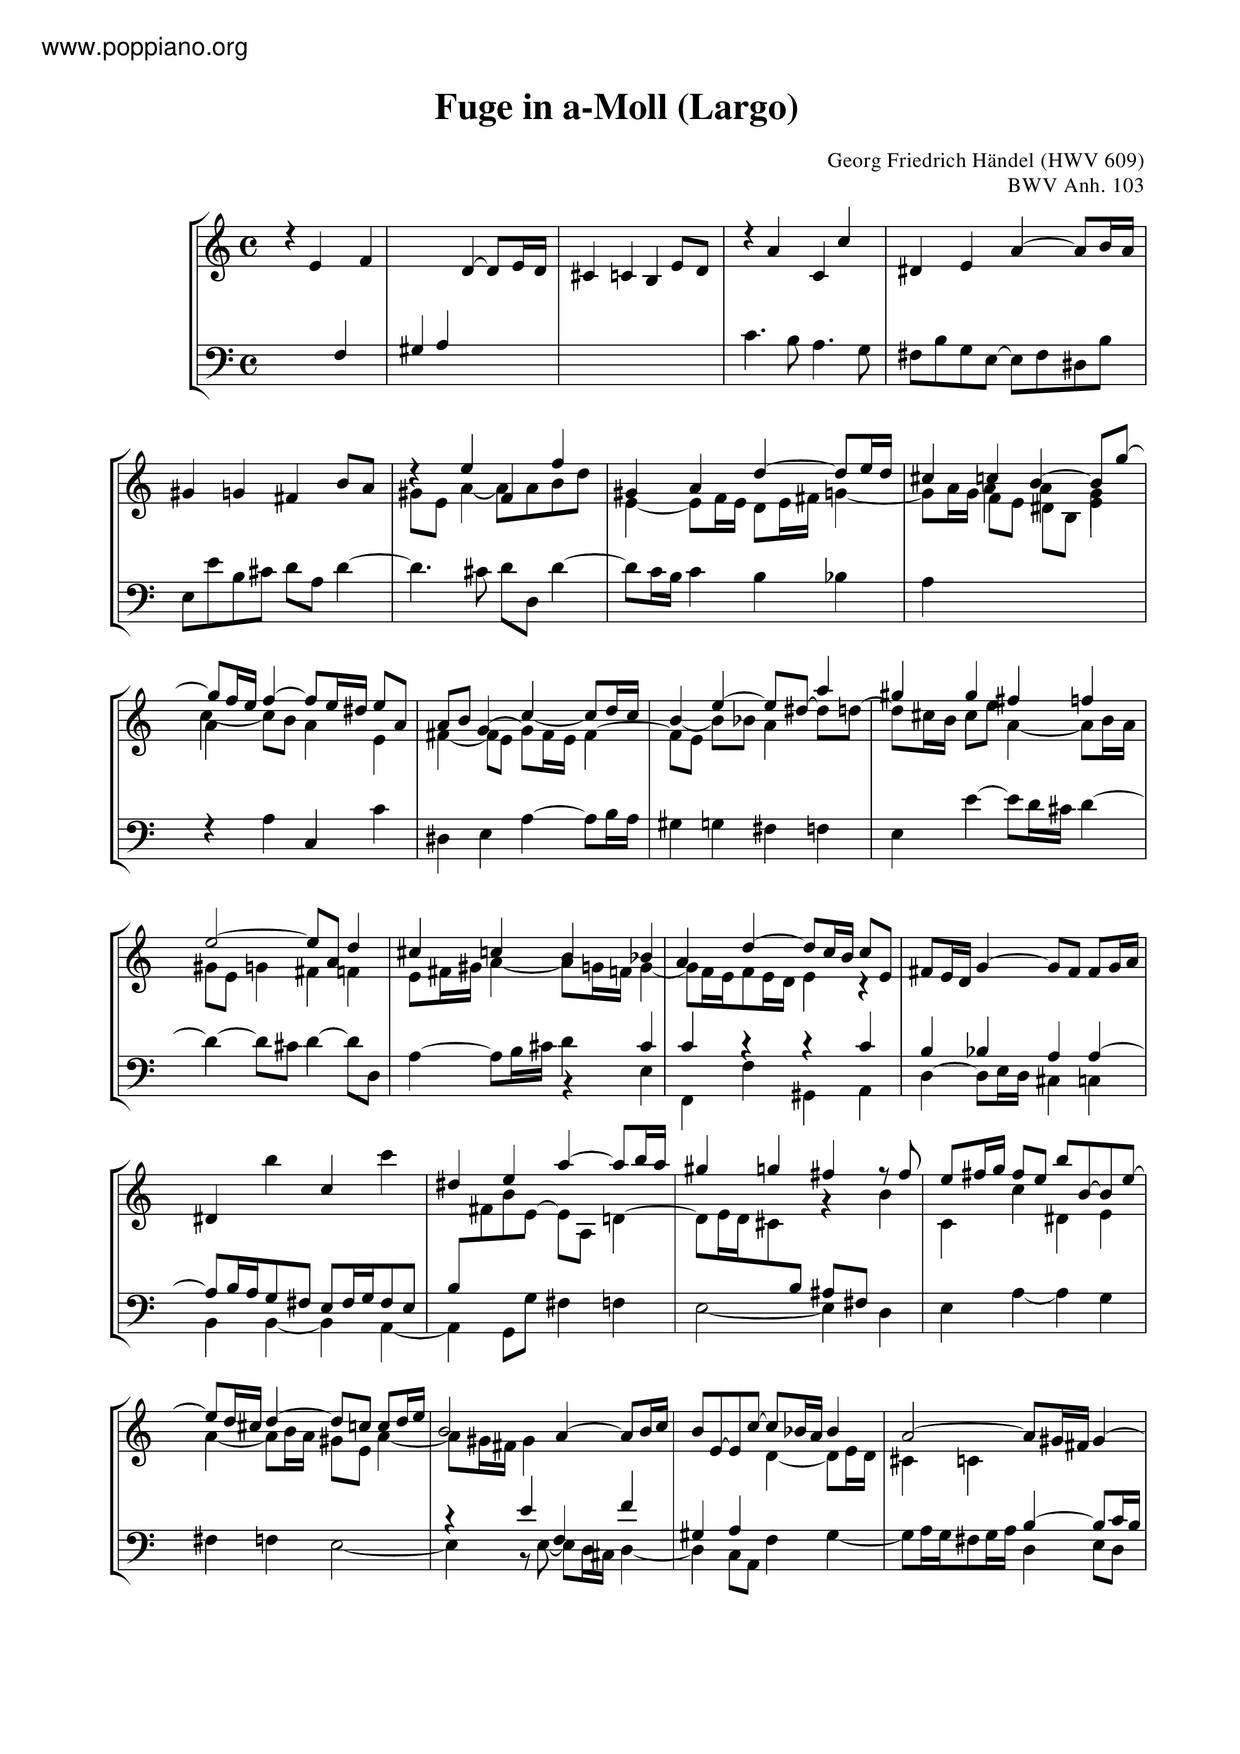 Fugue In A Minor, BWV Anh. 103 Score